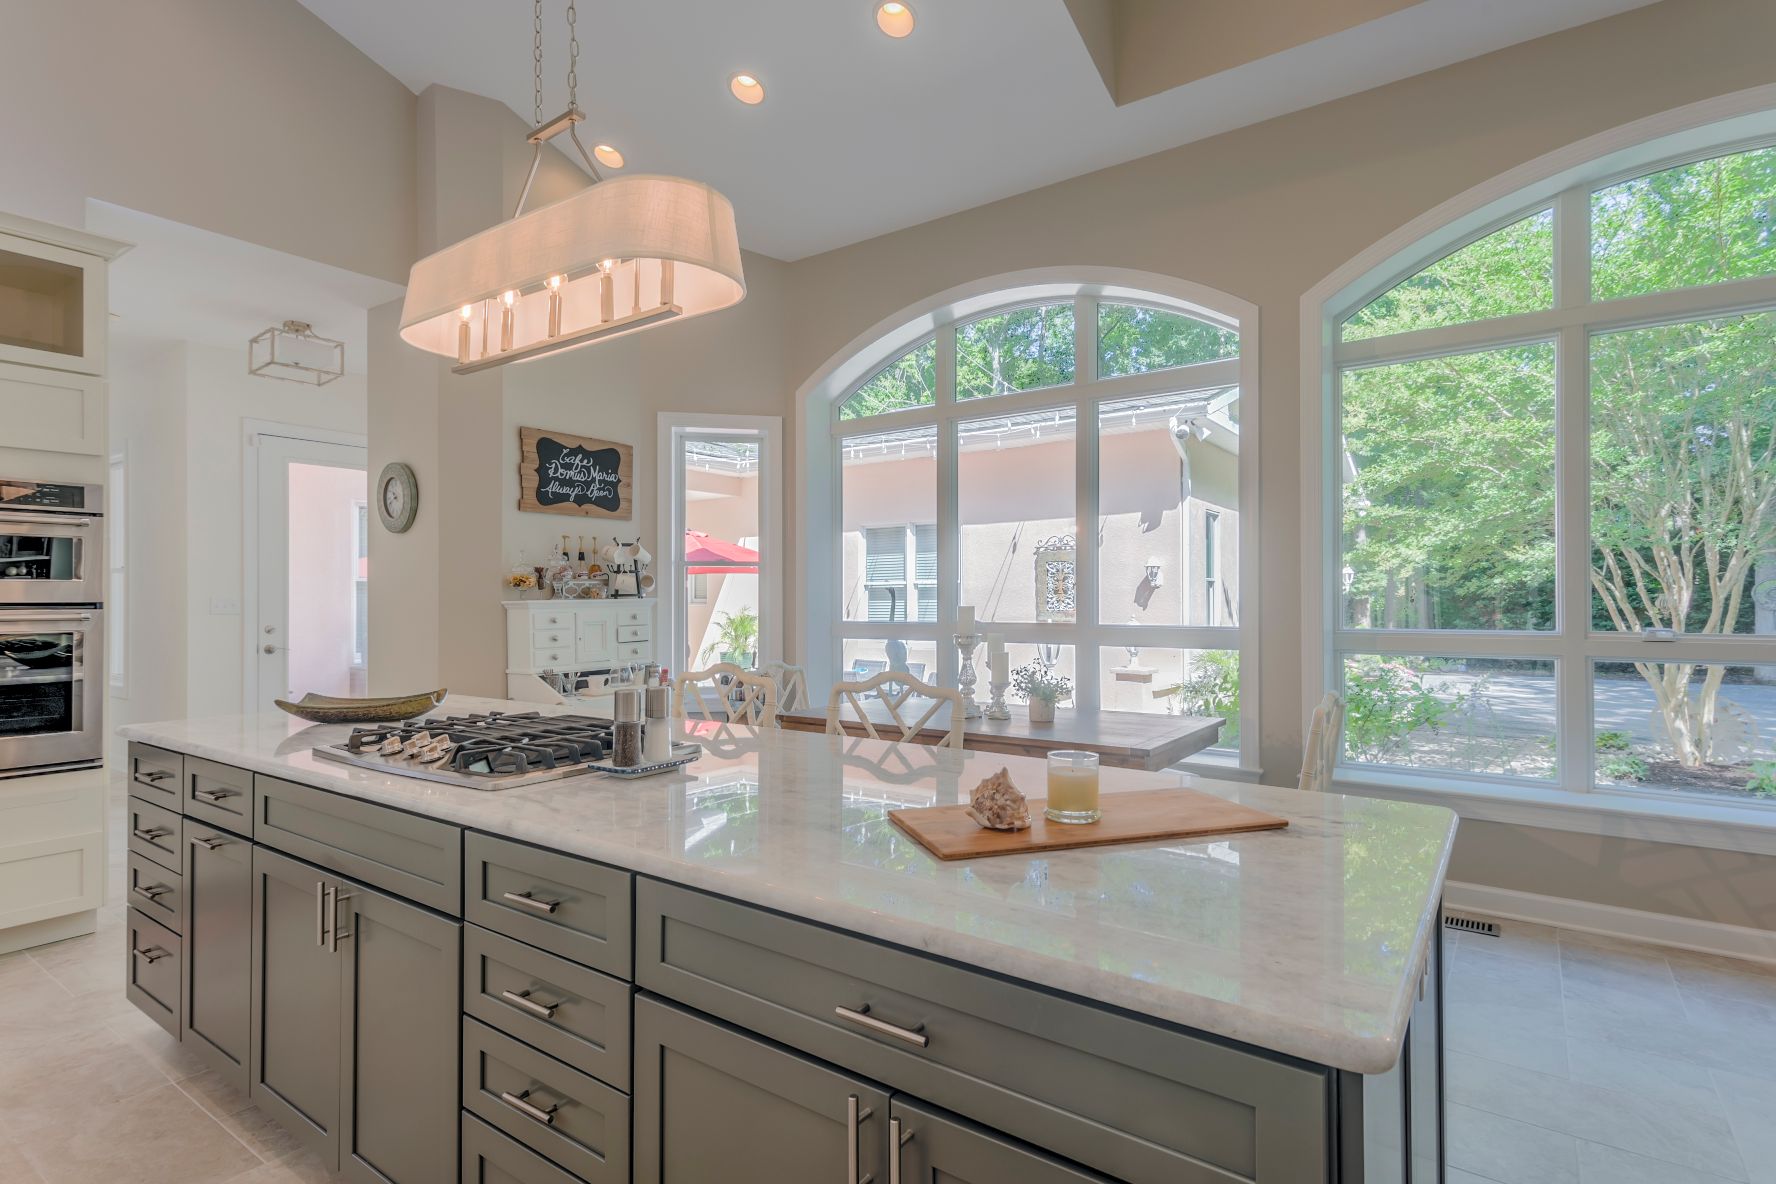 Kitchen in Juniper Court, Ocean Pines MD with Center Island and Vintage Lights